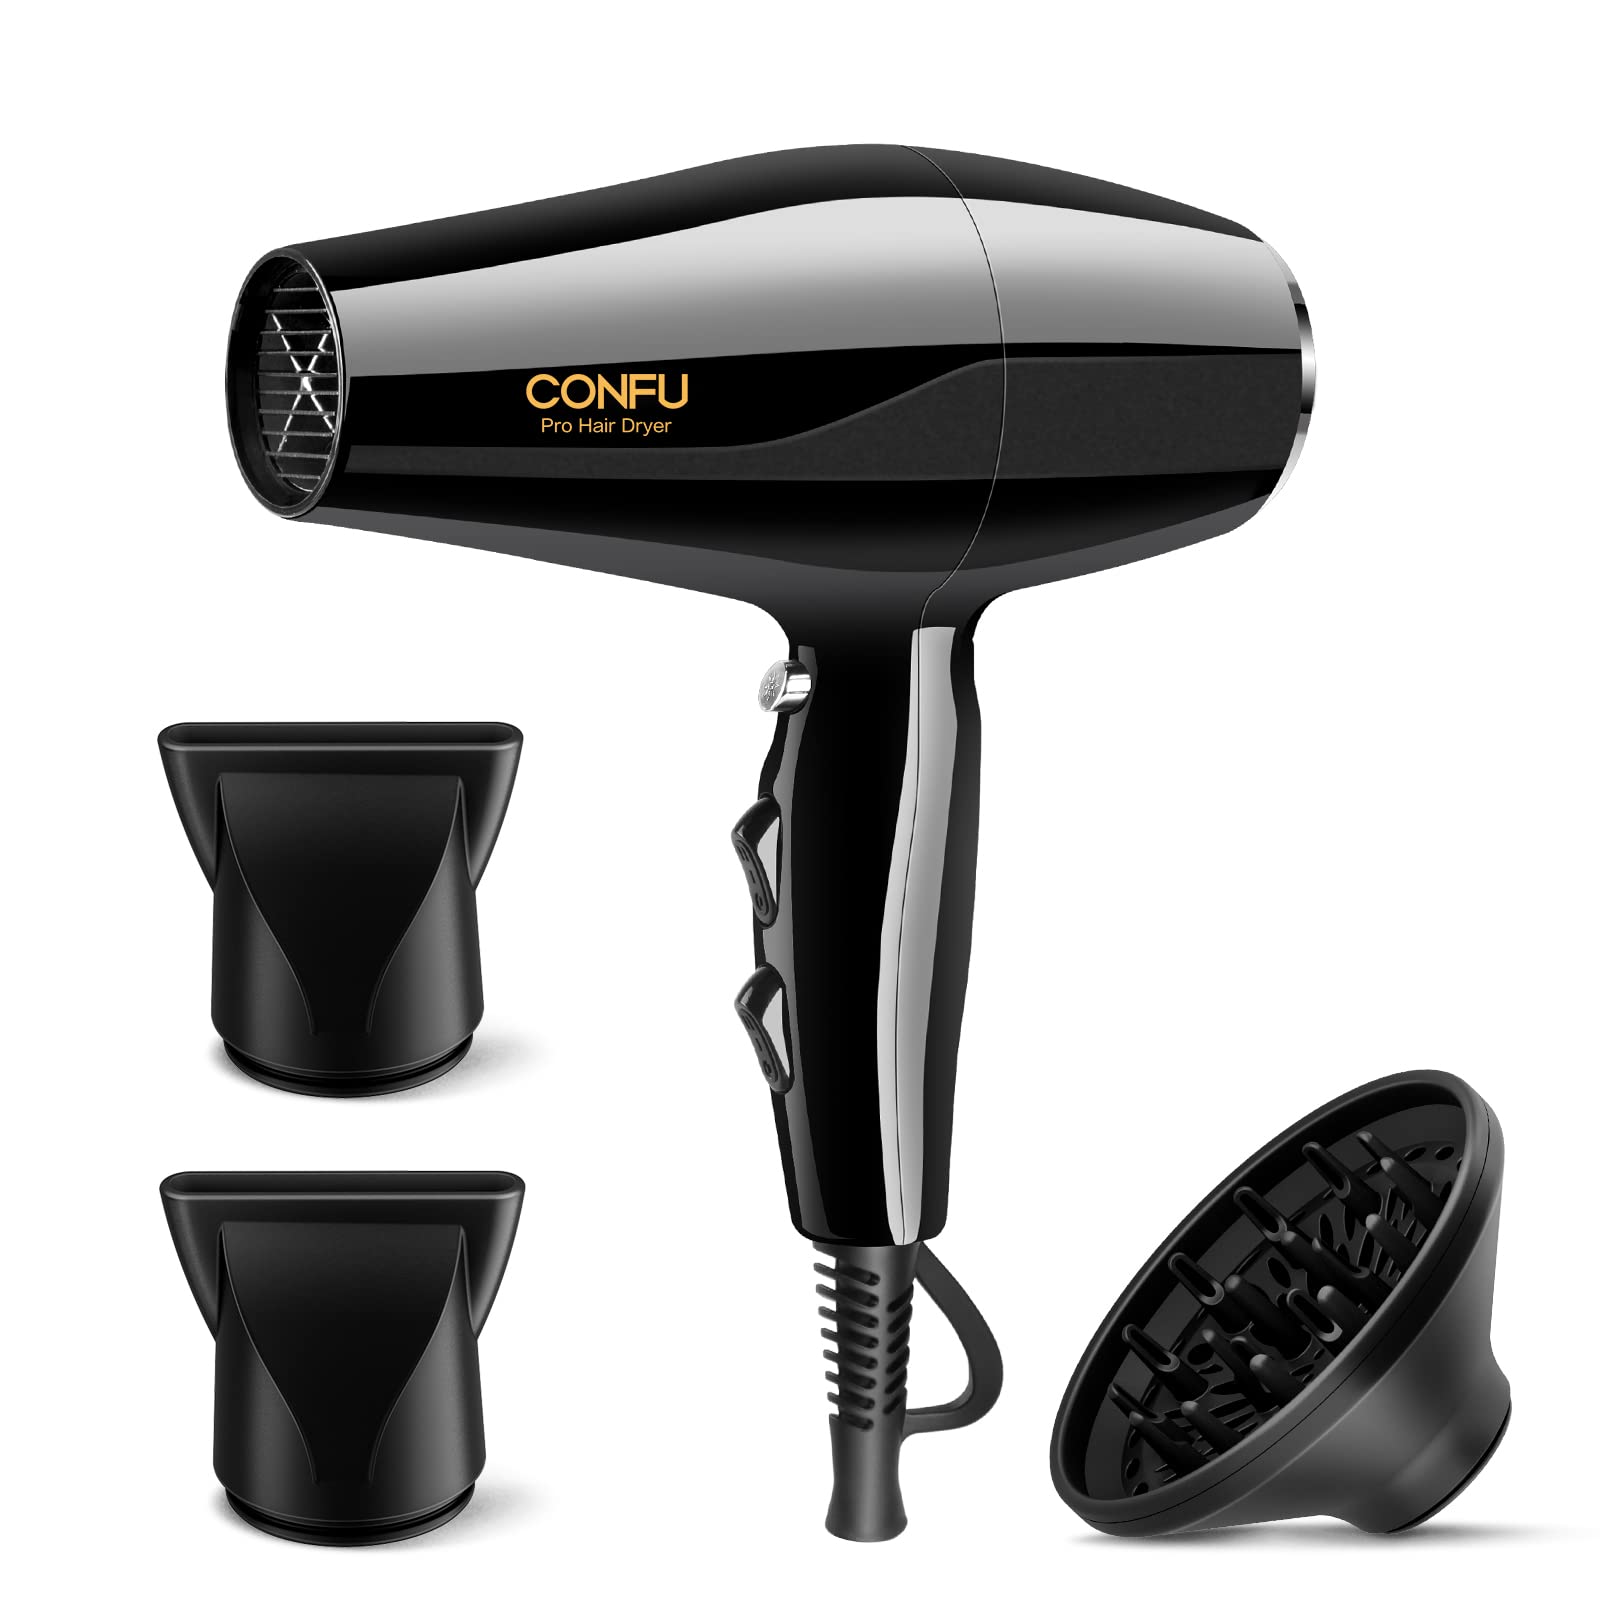 CONFU Professional Ionic Hair Dryer with Diffuser, CONFU Salon Blow Dryer 1875W Negative Ions Ceramic Quick Drying Hair Dryers, AC Mot